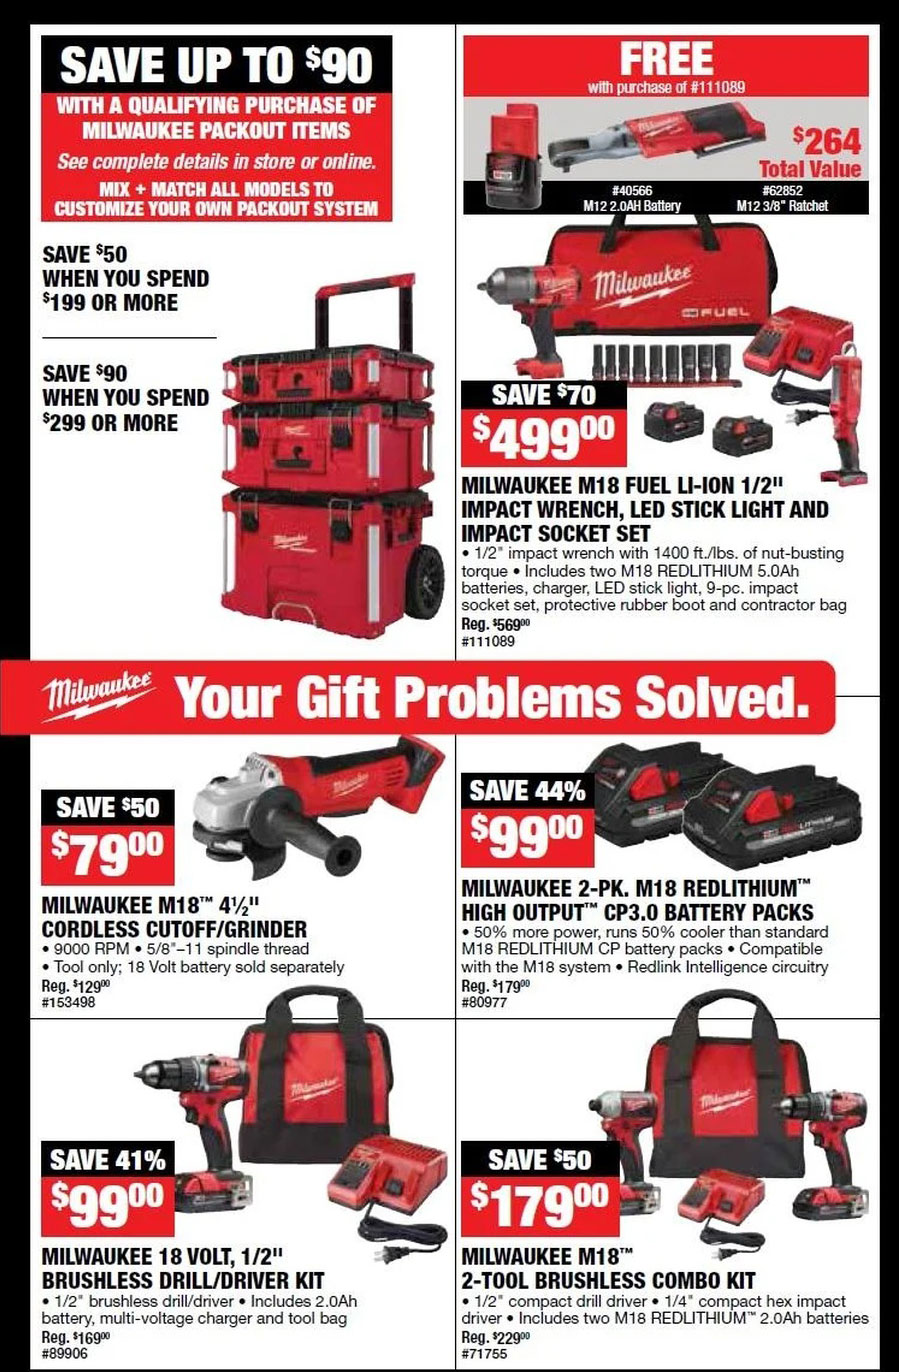 Northern Tool Black Friday 2020 Ad and Deals